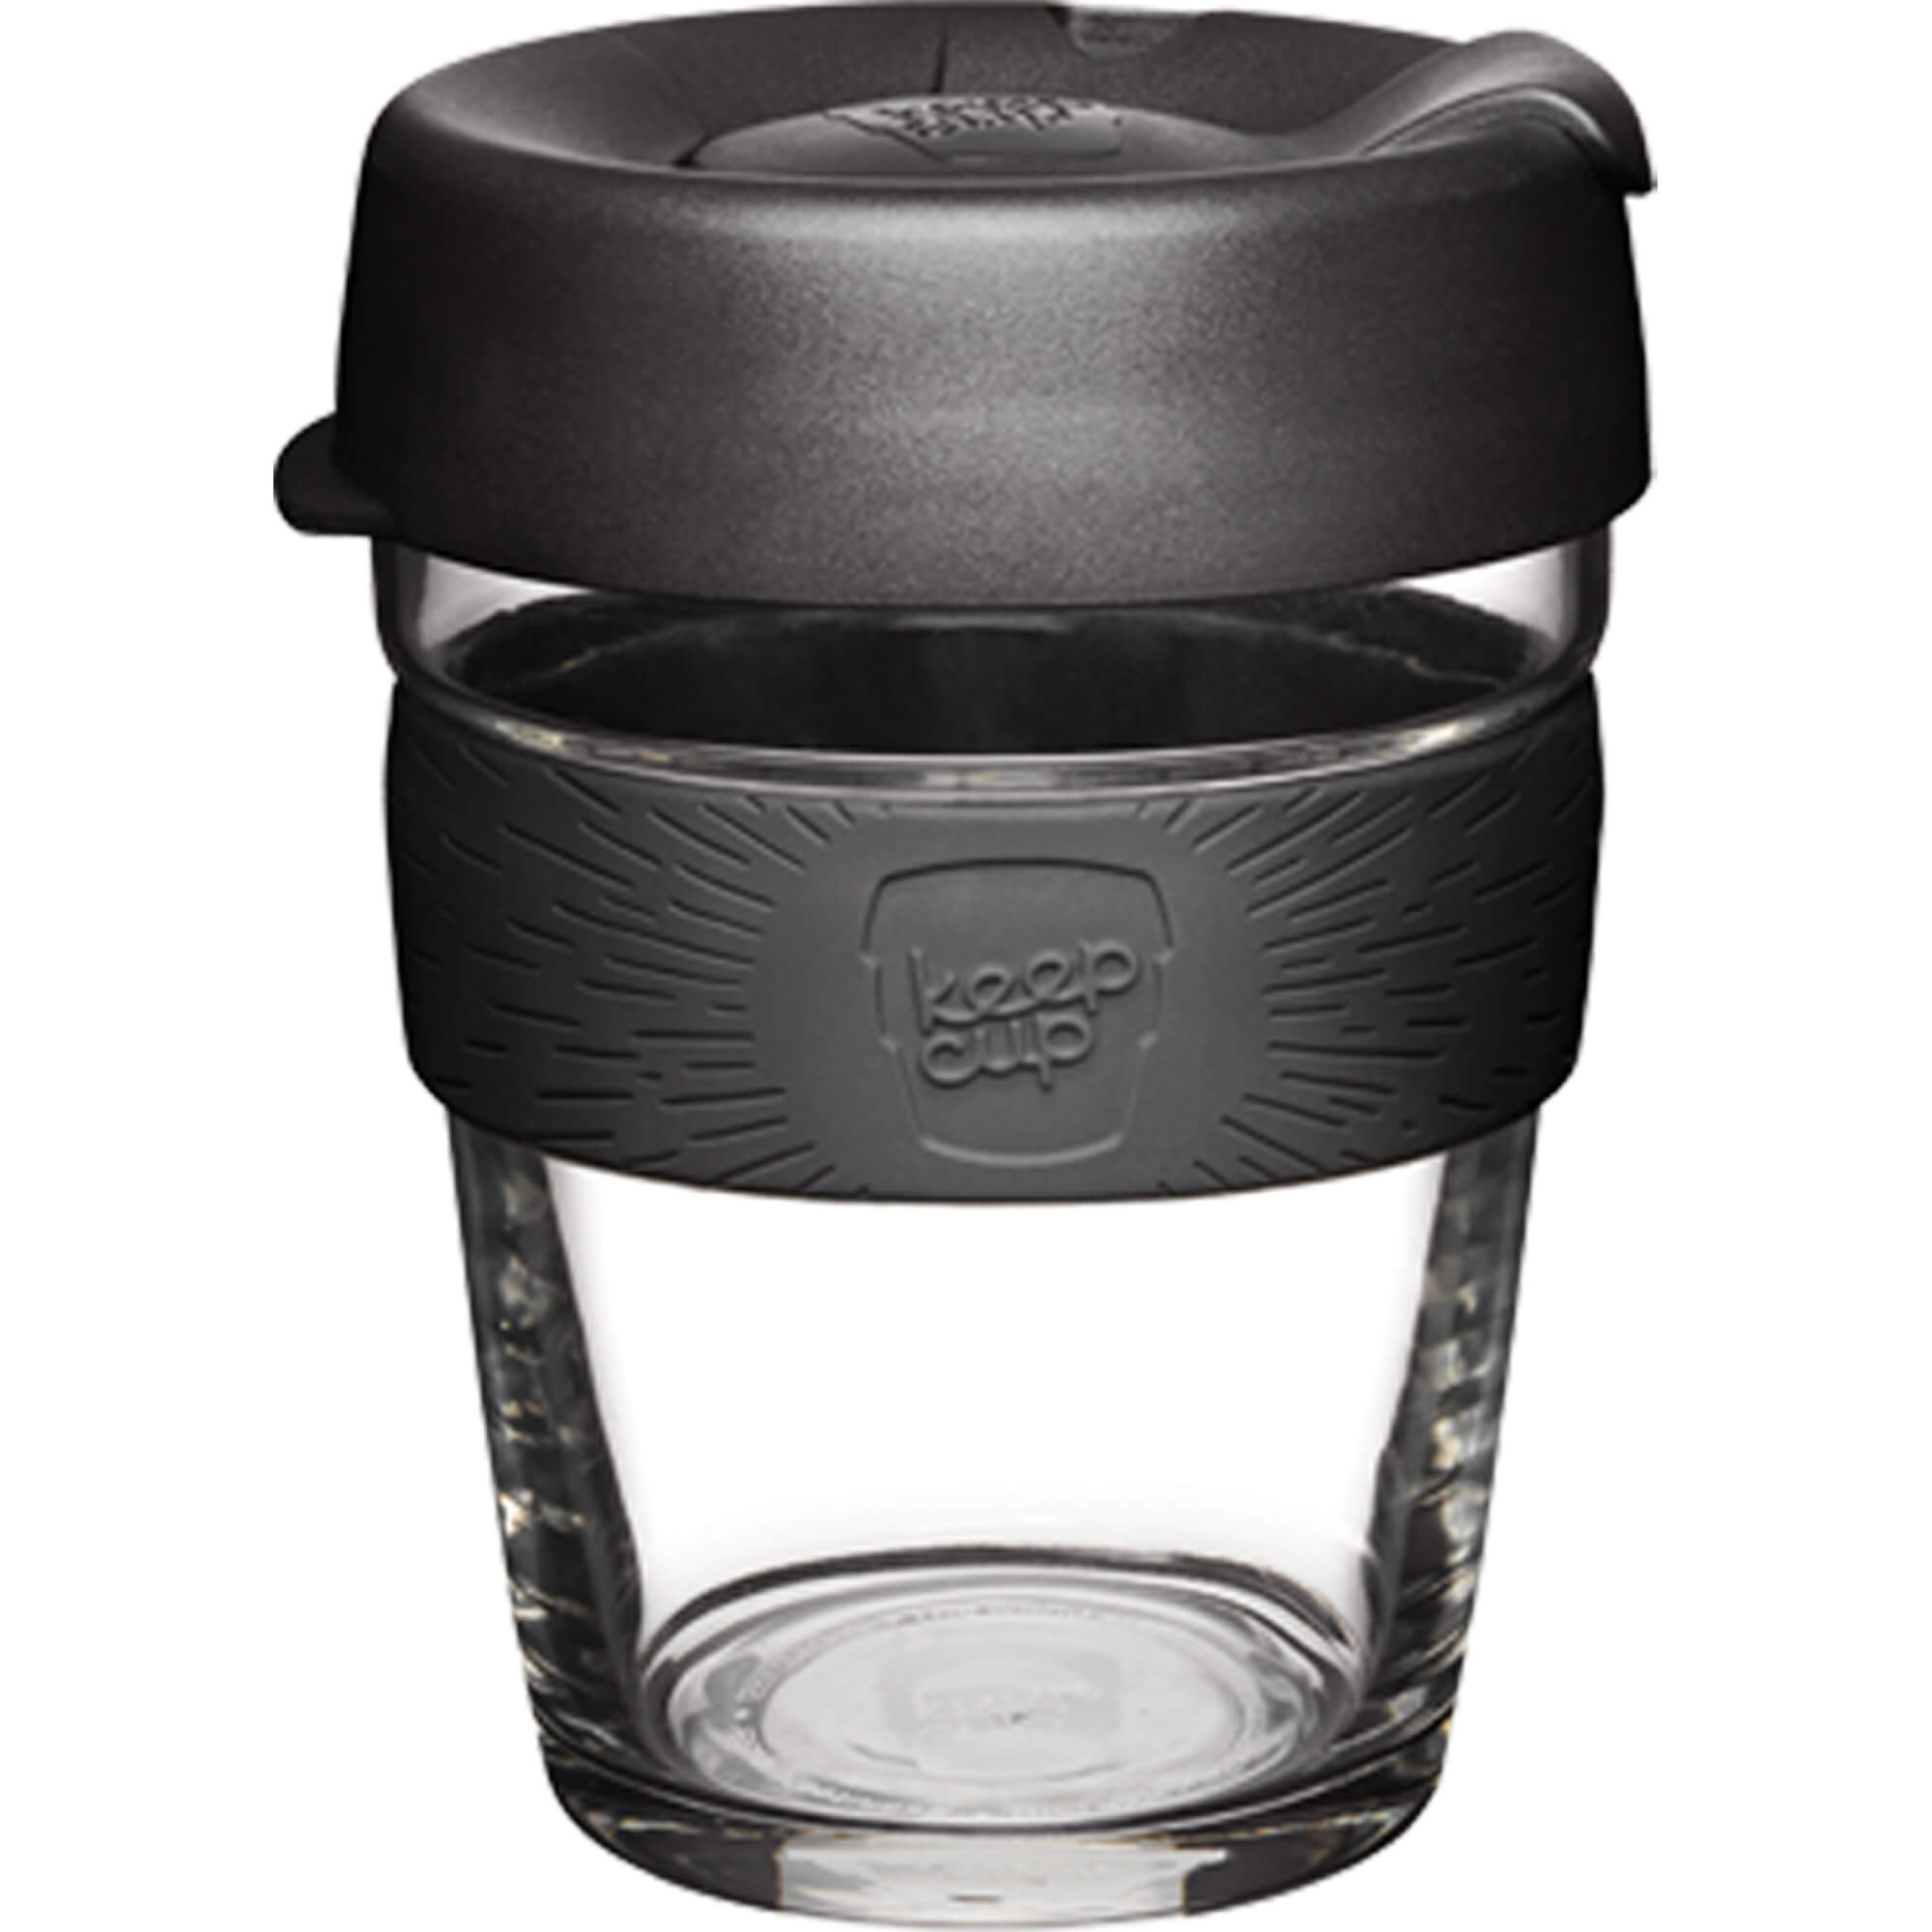 Photos - Water Bottle KeepCup Brew Glass Reusable Travel Coffee Cup, 340ml 12oz Black MCMB12 BBL 